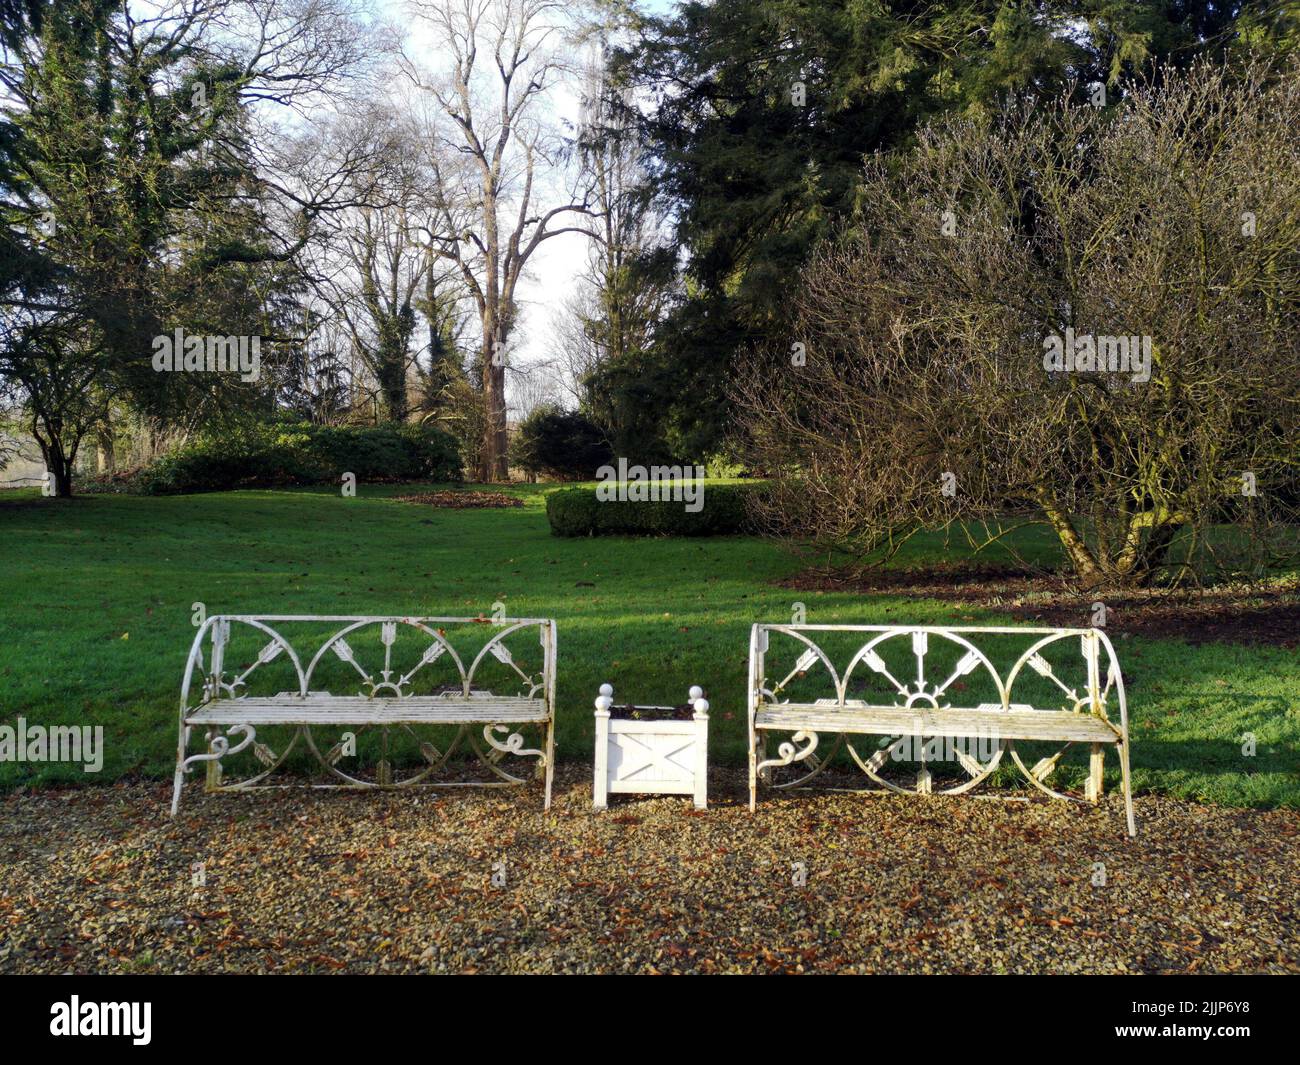 A view of white painted benches in a green park Stock Photo